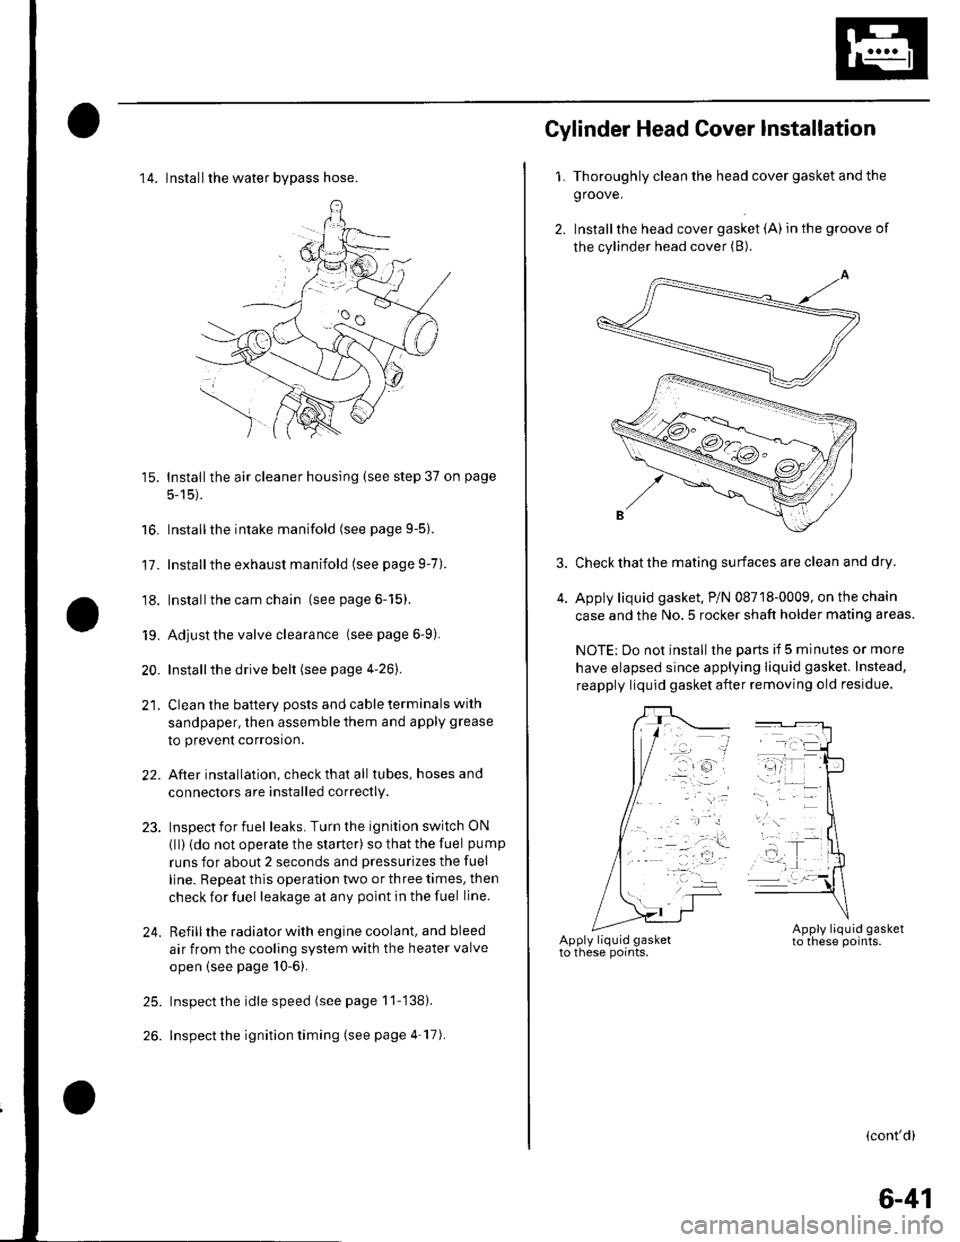 HONDA CIVIC 2003 7.G Workshop Manual 14. Installthe water bvpass hose.
15. Installthe air cleaner housing (see step 37 on page
5-15).
16. Installthe intake manifold (see page 9-5).
17. Installthe exhaust manifold (see page 9-7).
18. Ins